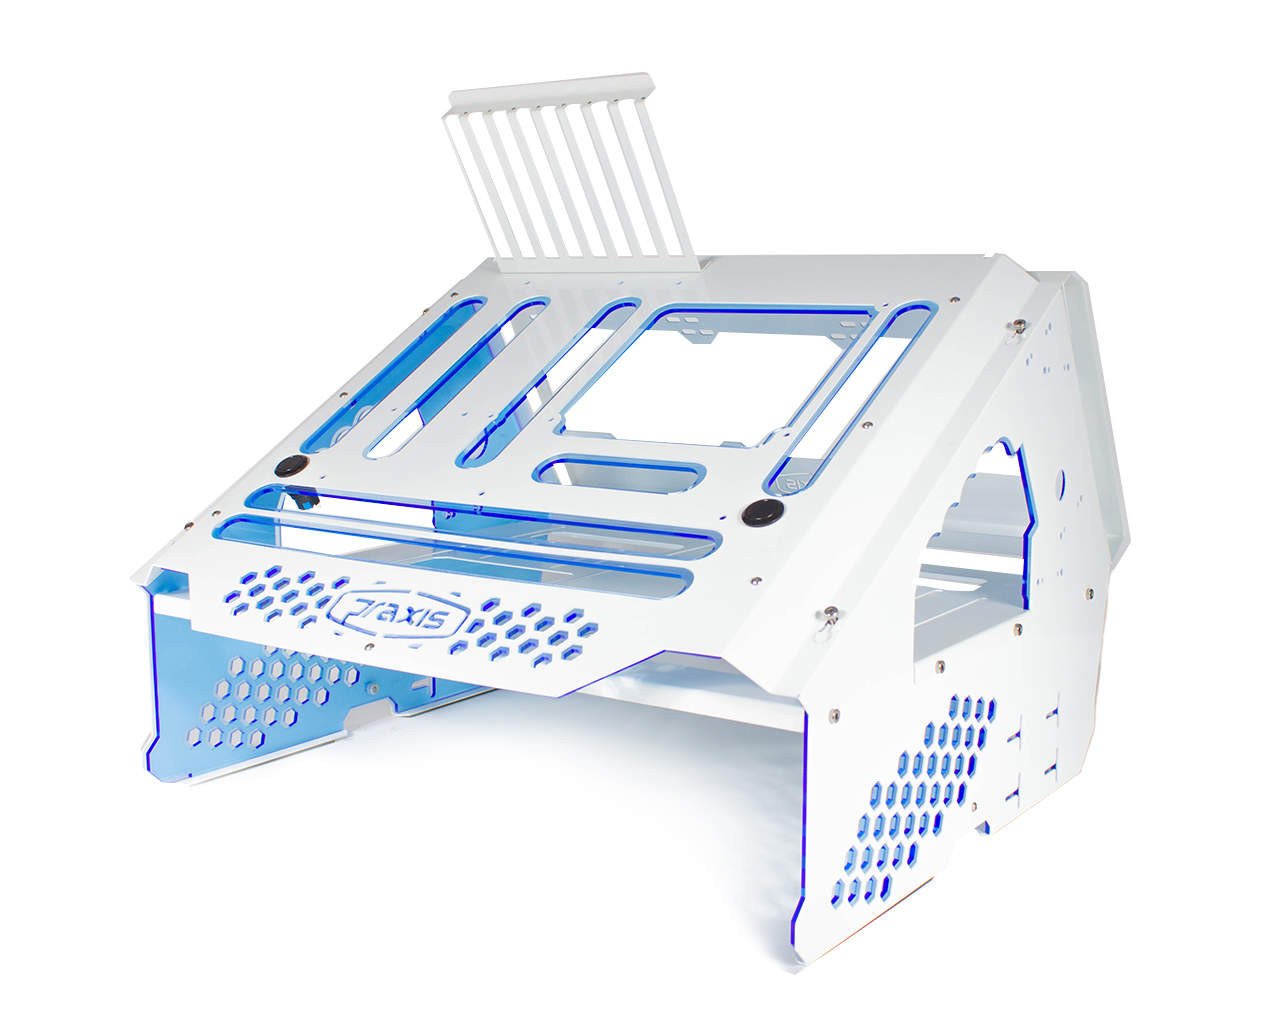 Praxis WetBench - PrimoChill - KEEPING IT COOL White w/UV Blue Accents